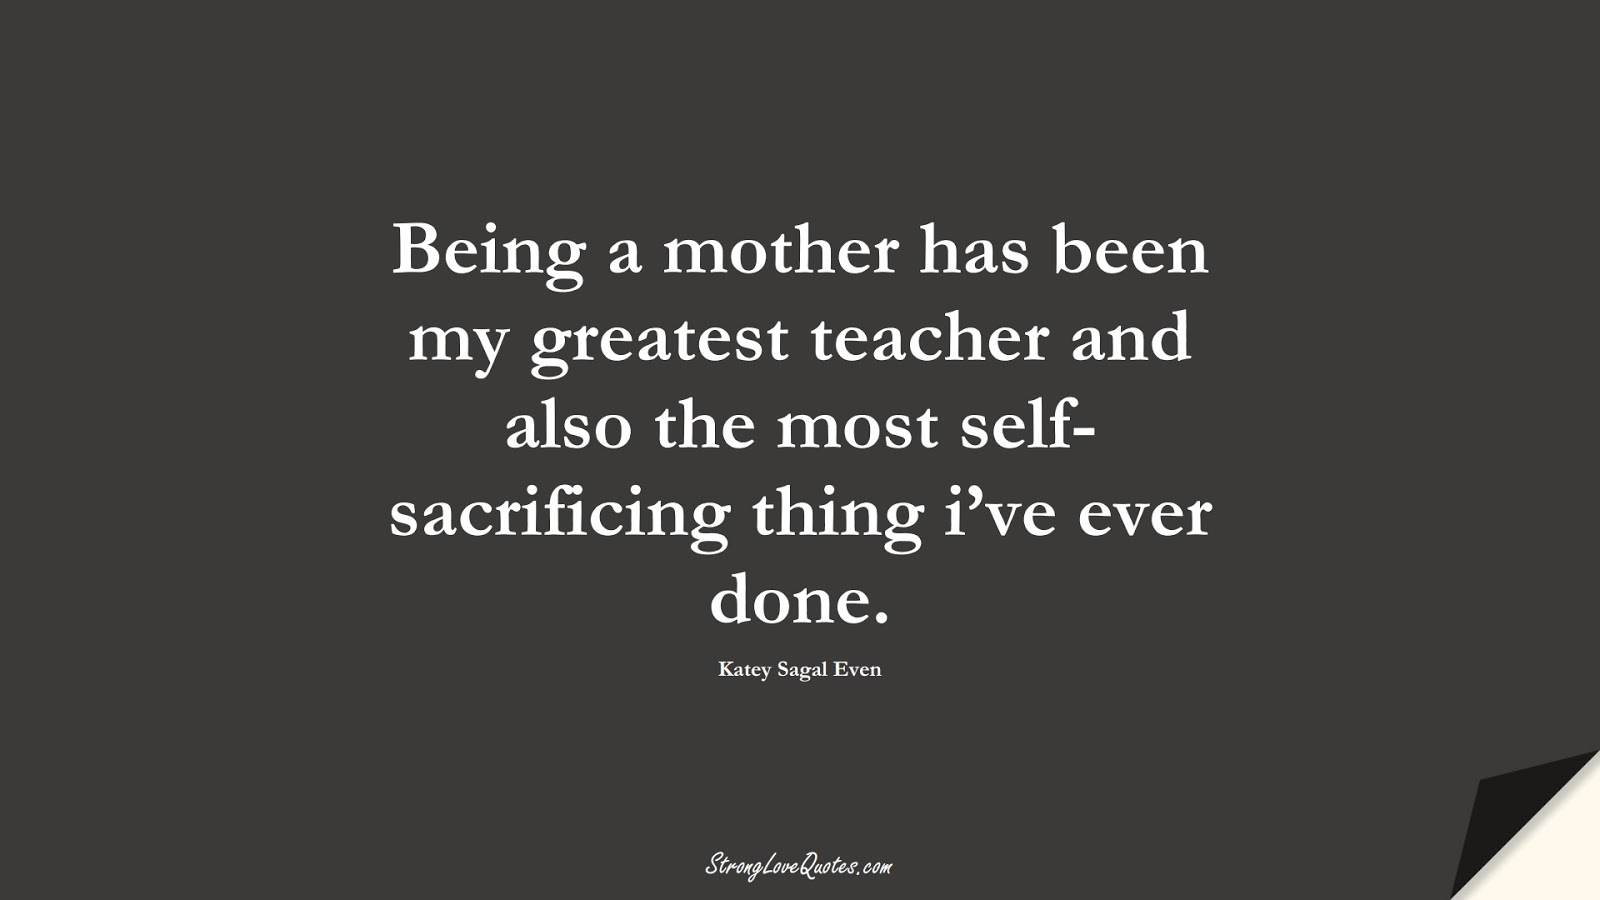 Being a mother has been my greatest teacher and also the most self-sacrificing thing i’ve ever done. (Katey Sagal Even);  #EducationQuotes